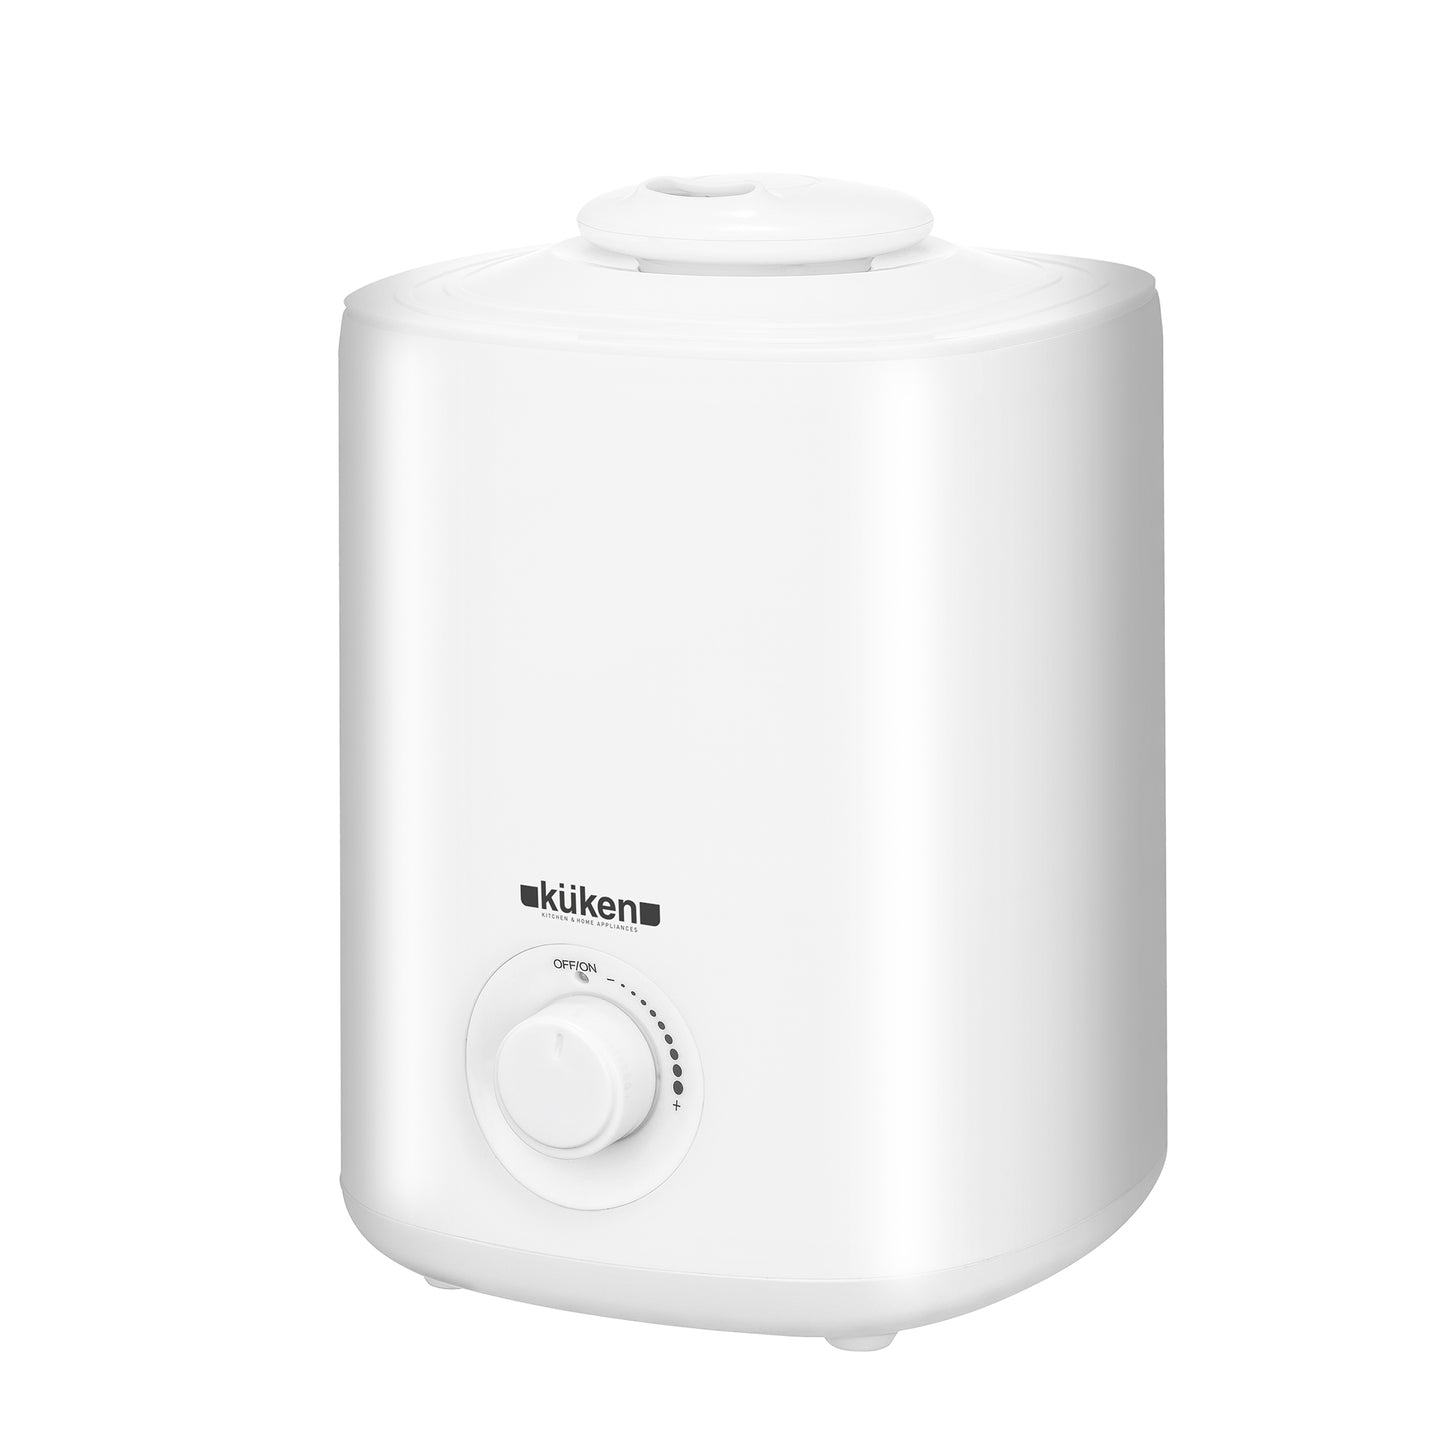 KÜKEN 20W 2.5L HUMIDIFIER AND AIR FLAVORATOR 